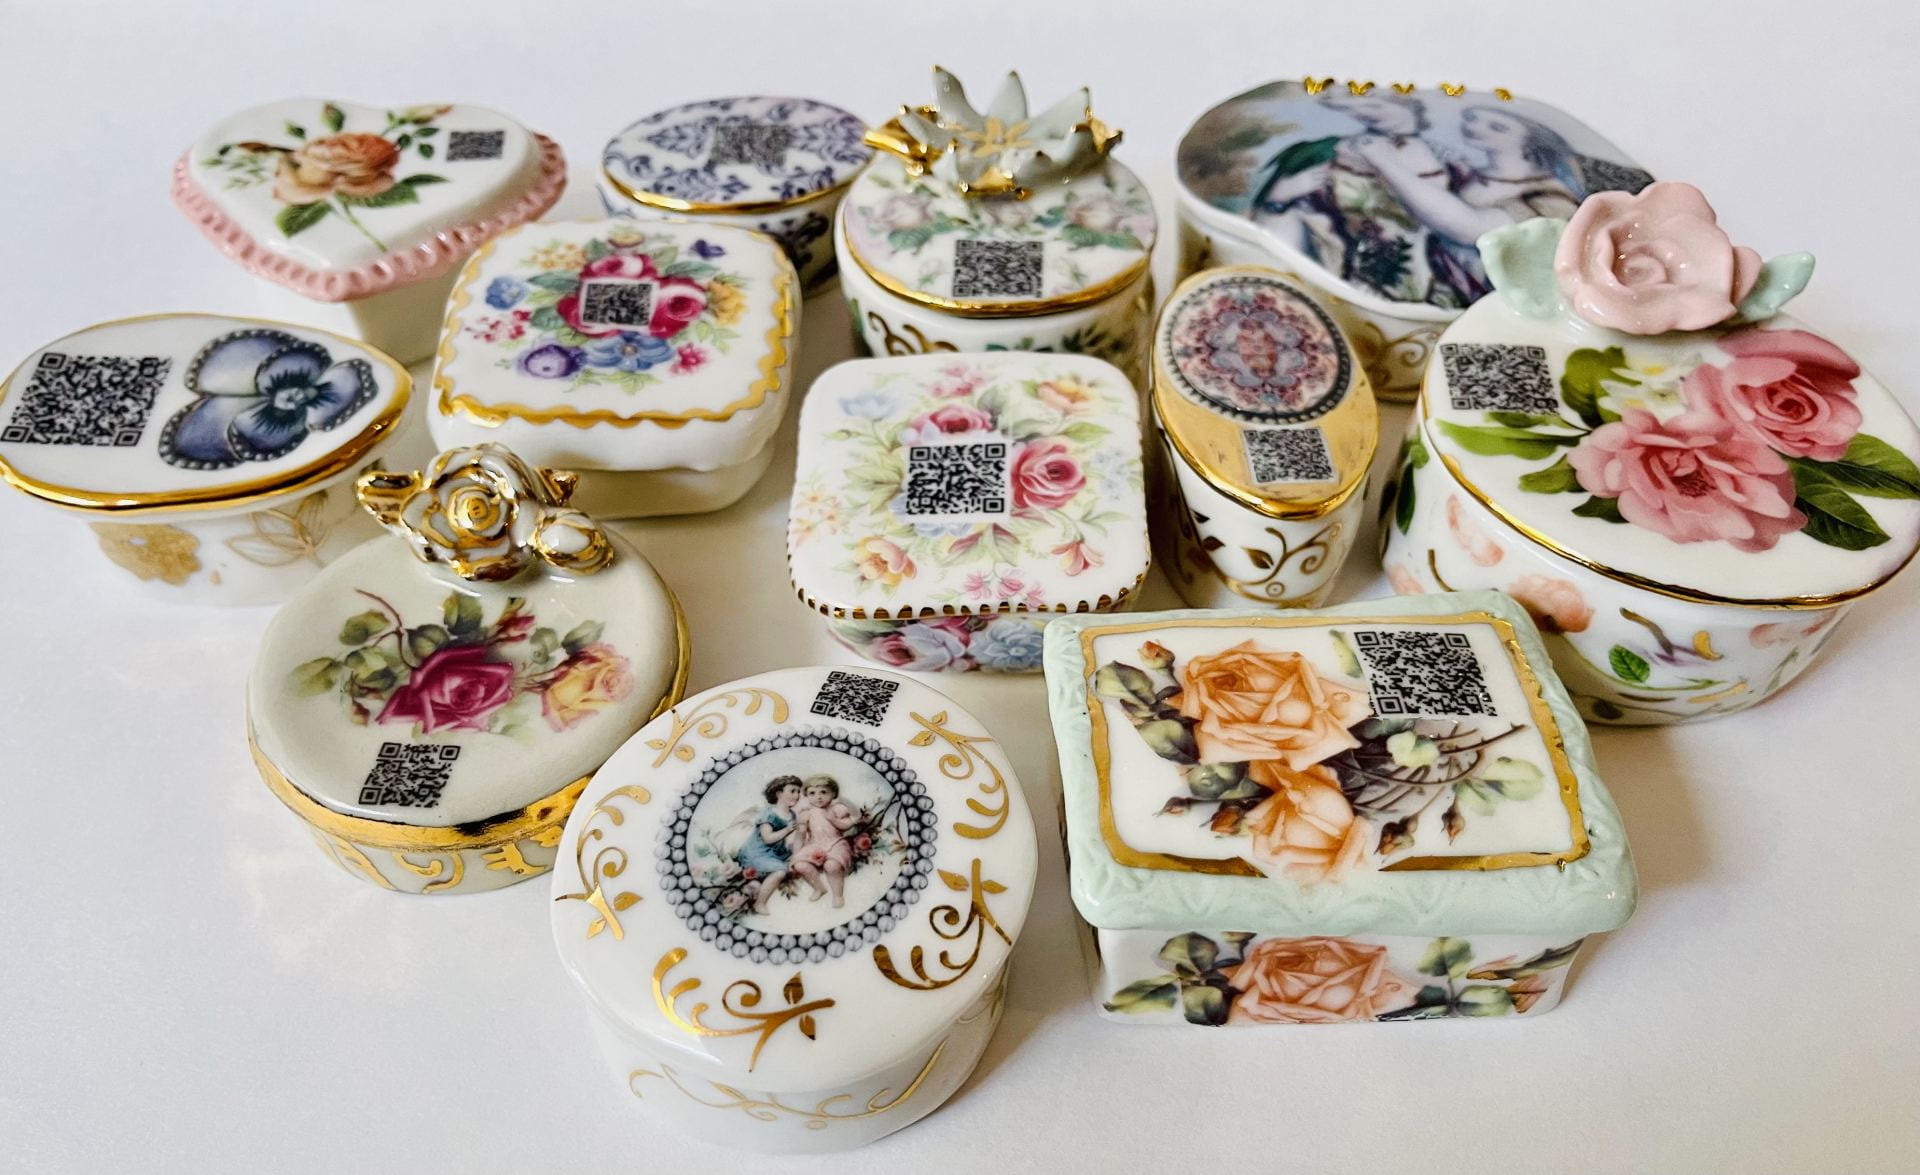 Twelve porcelain floral pillboxes with a QR code on their lids